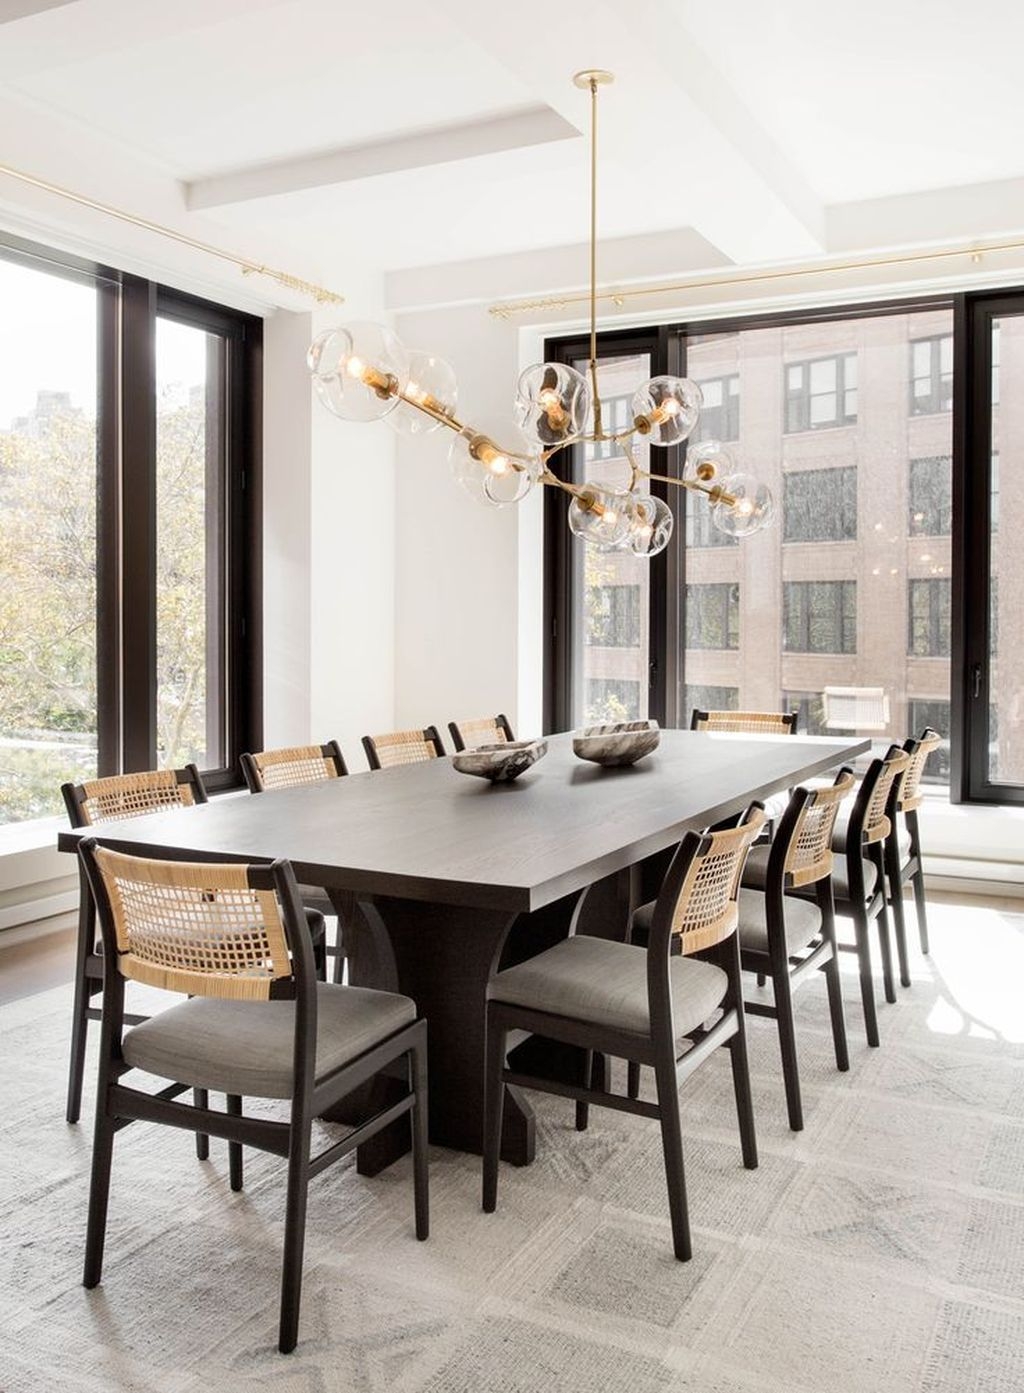 Marvelous Contemporary Style Decor Ideas For Your Dining Room 16